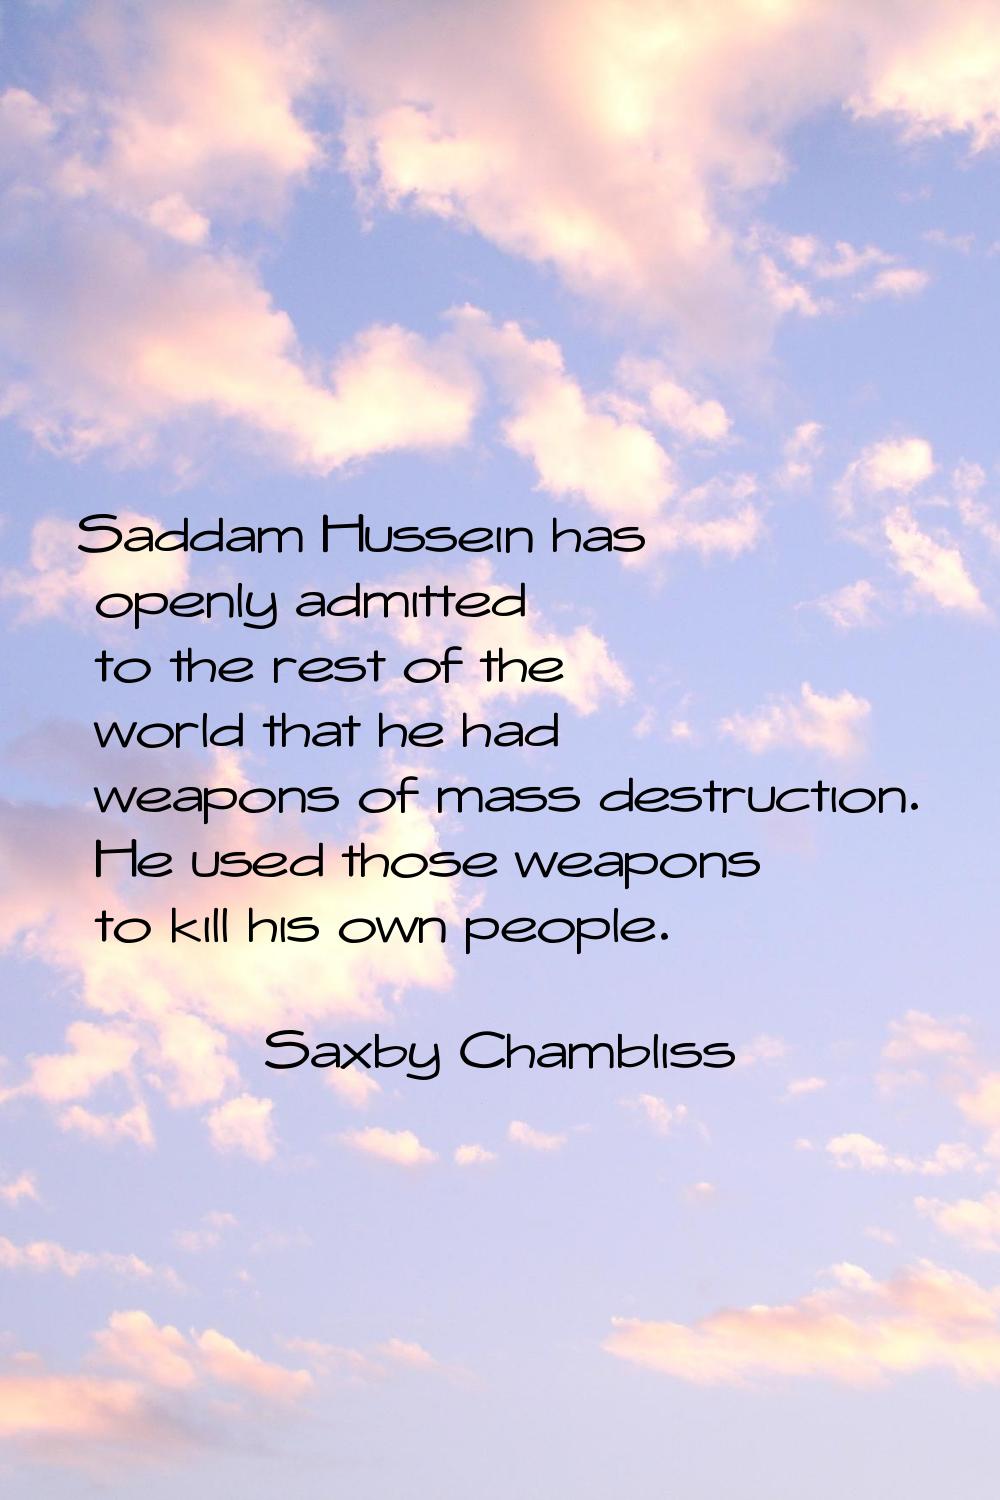 Saddam Hussein has openly admitted to the rest of the world that he had weapons of mass destruction